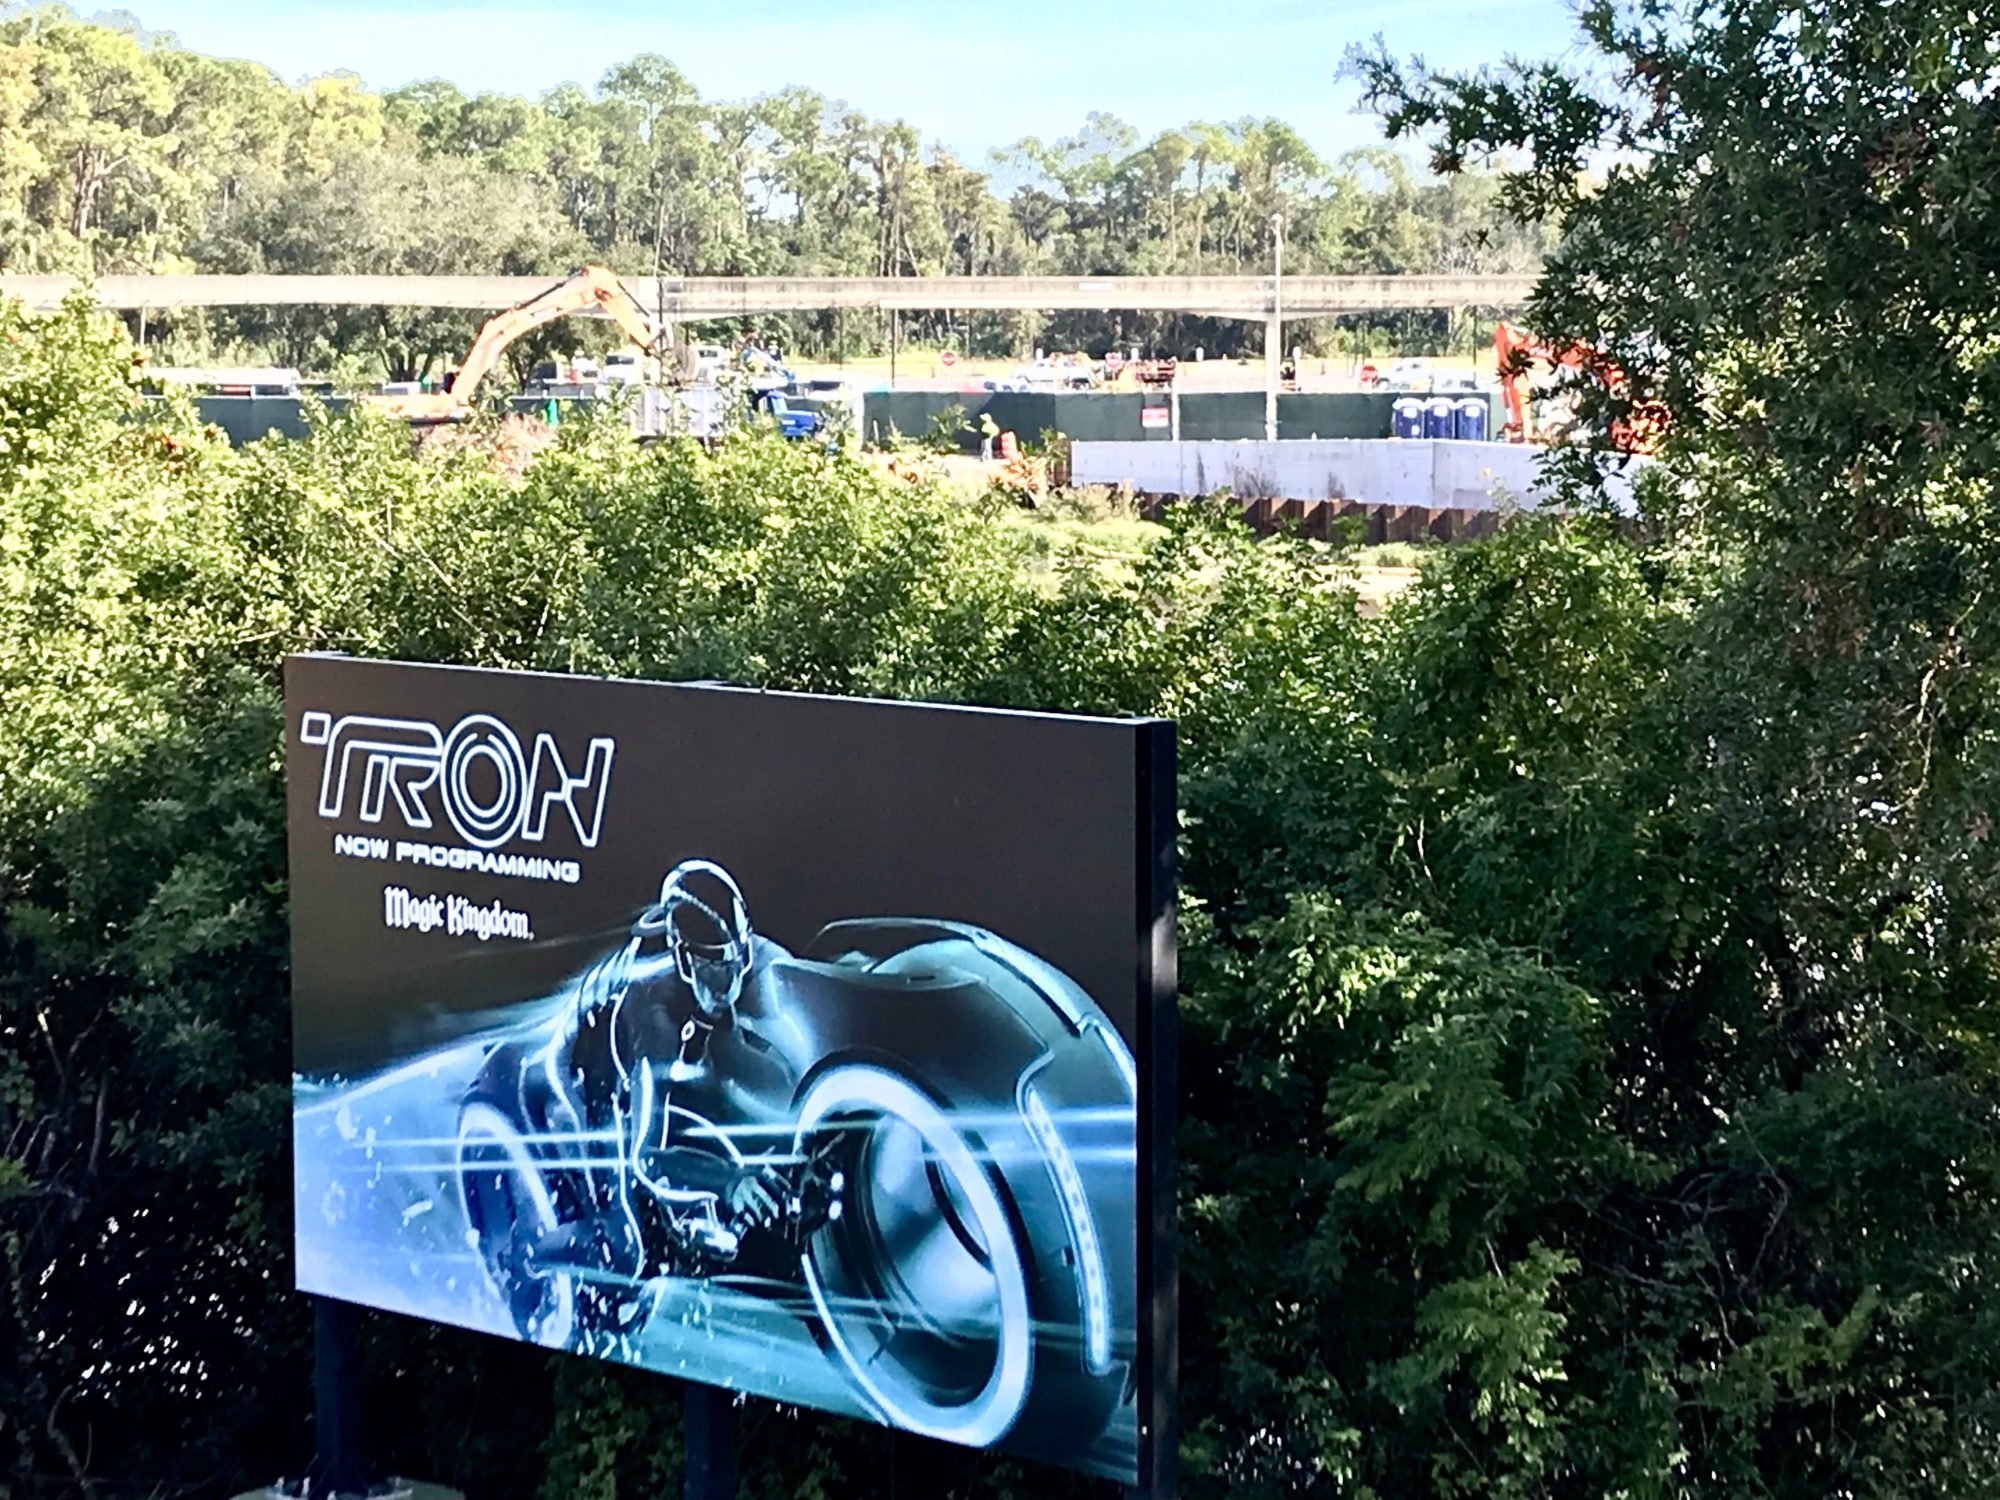 Tron Ride Construction Ramping Up